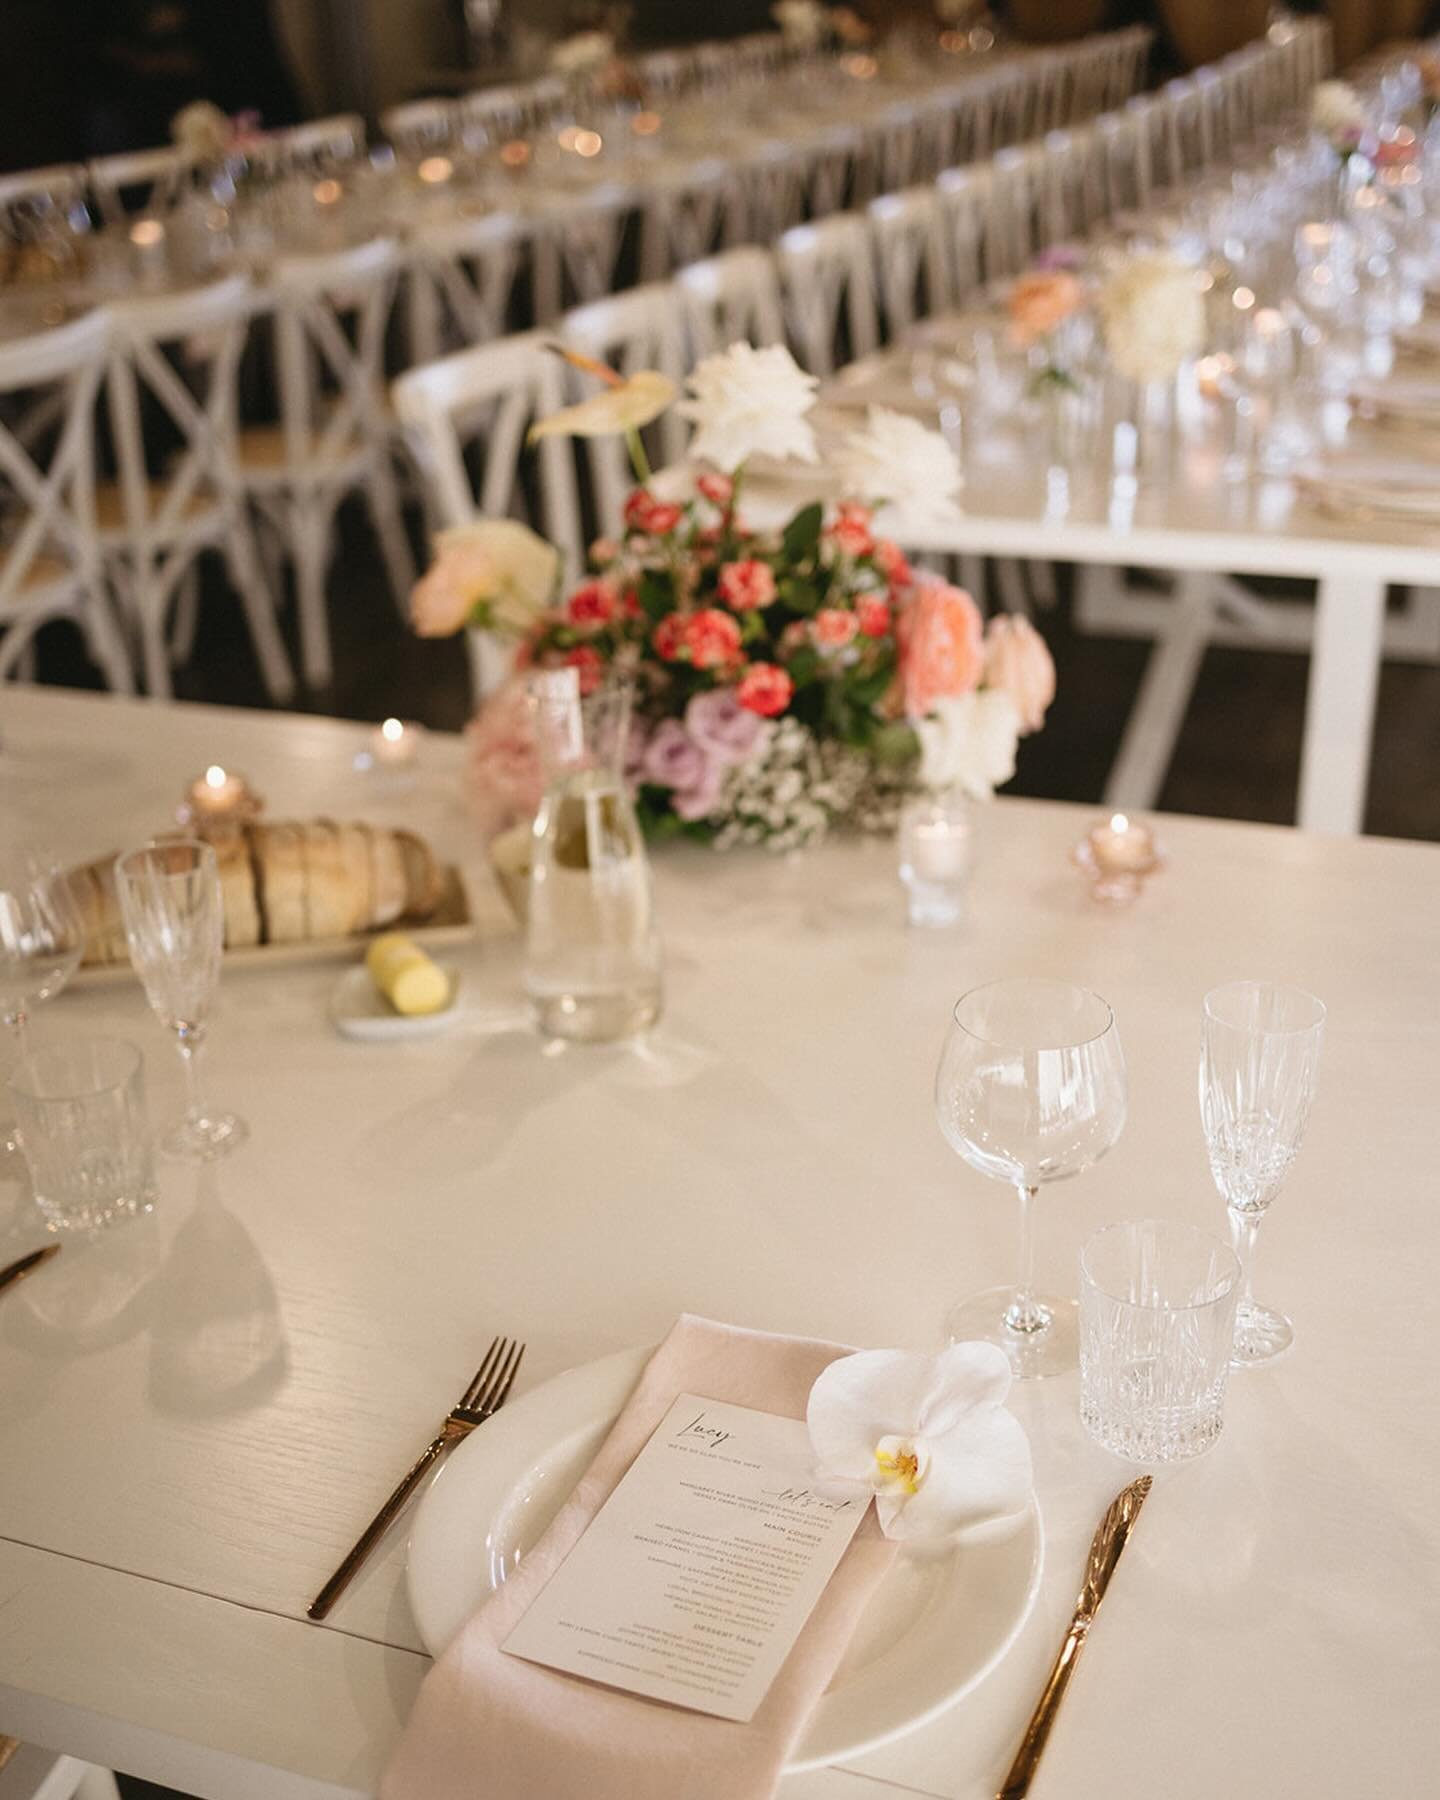 Our White Timber Tables at 1.2m wide are a perfect size for fabulous feasts and florals!
LUCY + BEN chose to table style with Copper flatware, Ascot white china, Bohemia Crystal and soft pink linens with beautiful blooms @scentiment_flowers 👌